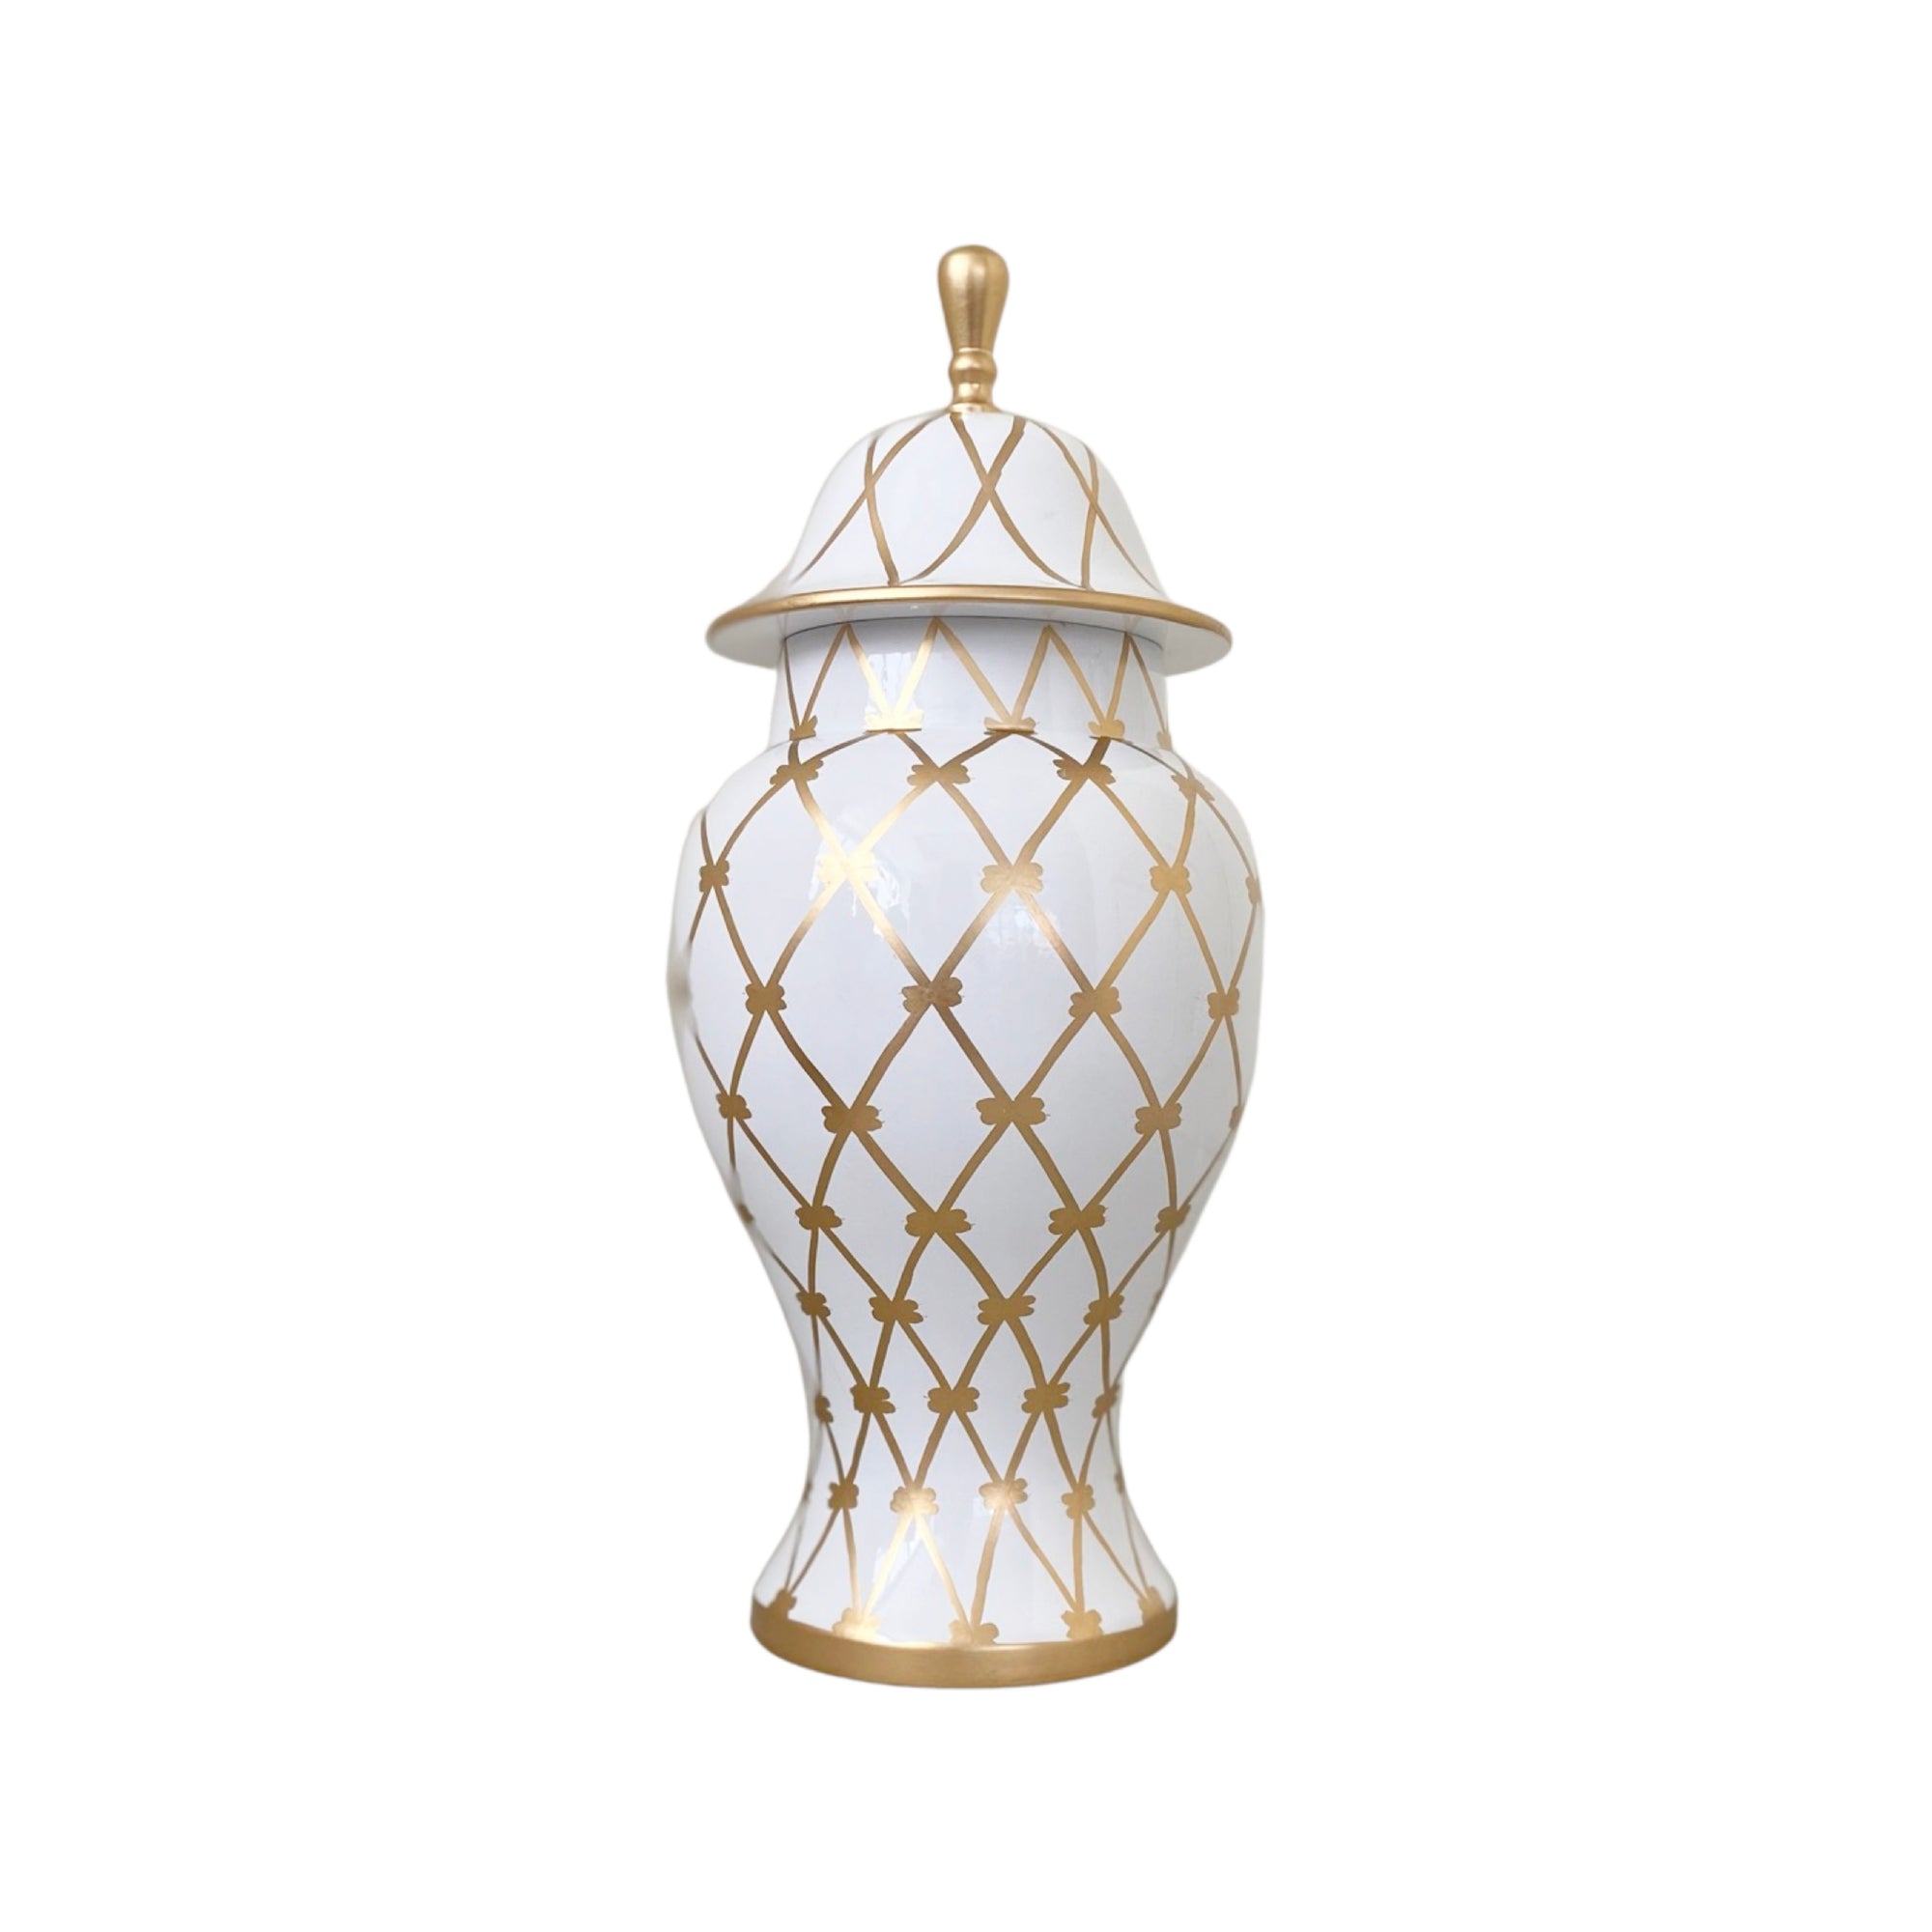 Dana Gibson Gold French Twist Ginger Jar, Small